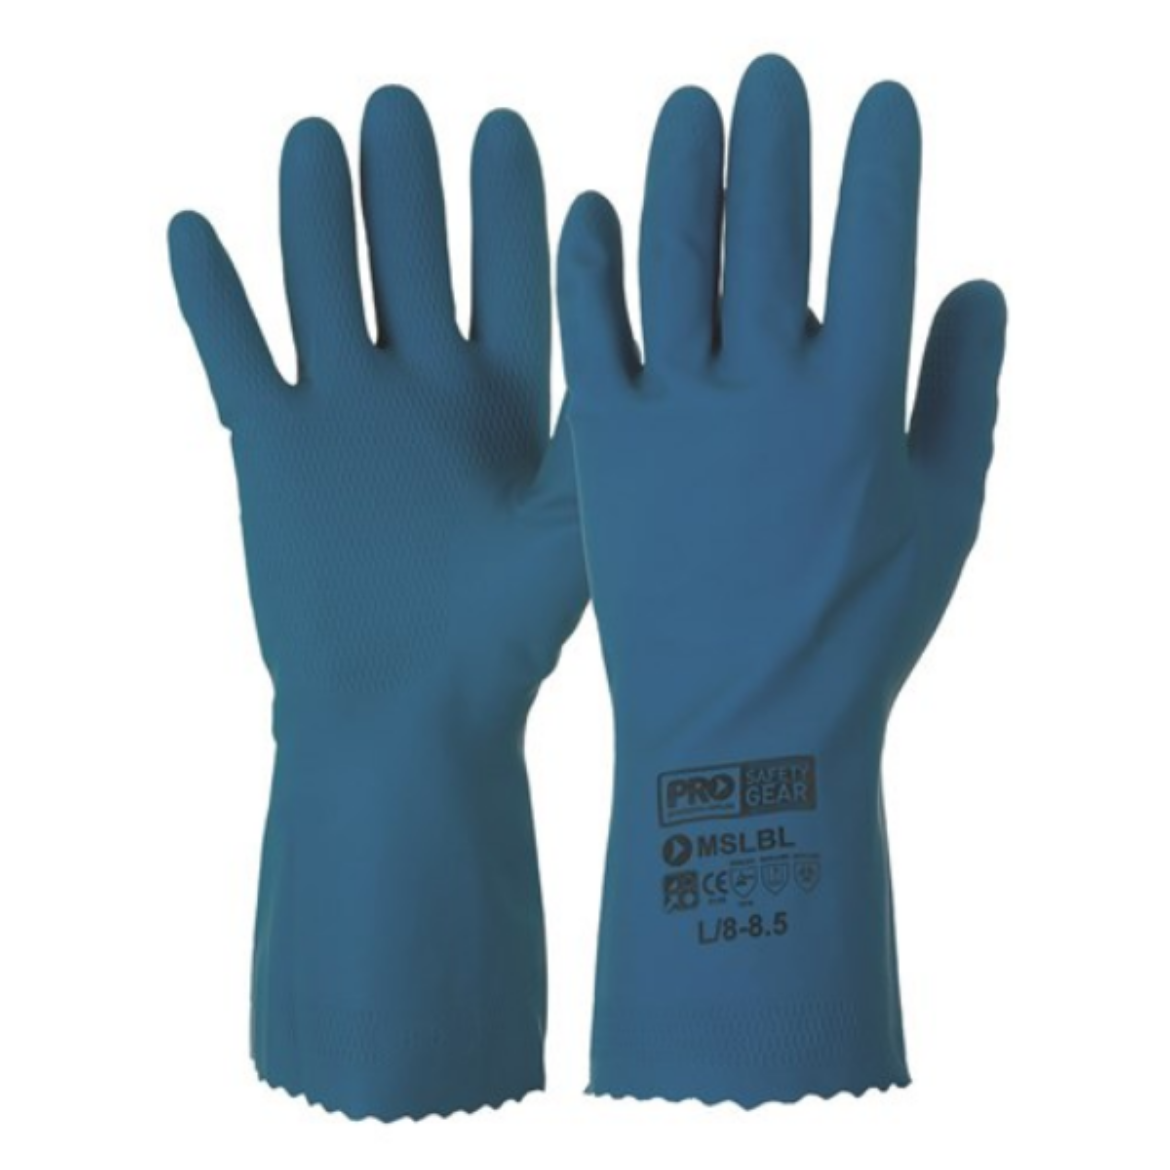 Picture of SILVERLINED LATEX RUBBER HOUSEHOLD GLOVES - BLUE. AVAILABLE IN SIZES S/6, M/7, L/8, XL/9, 2XL/10